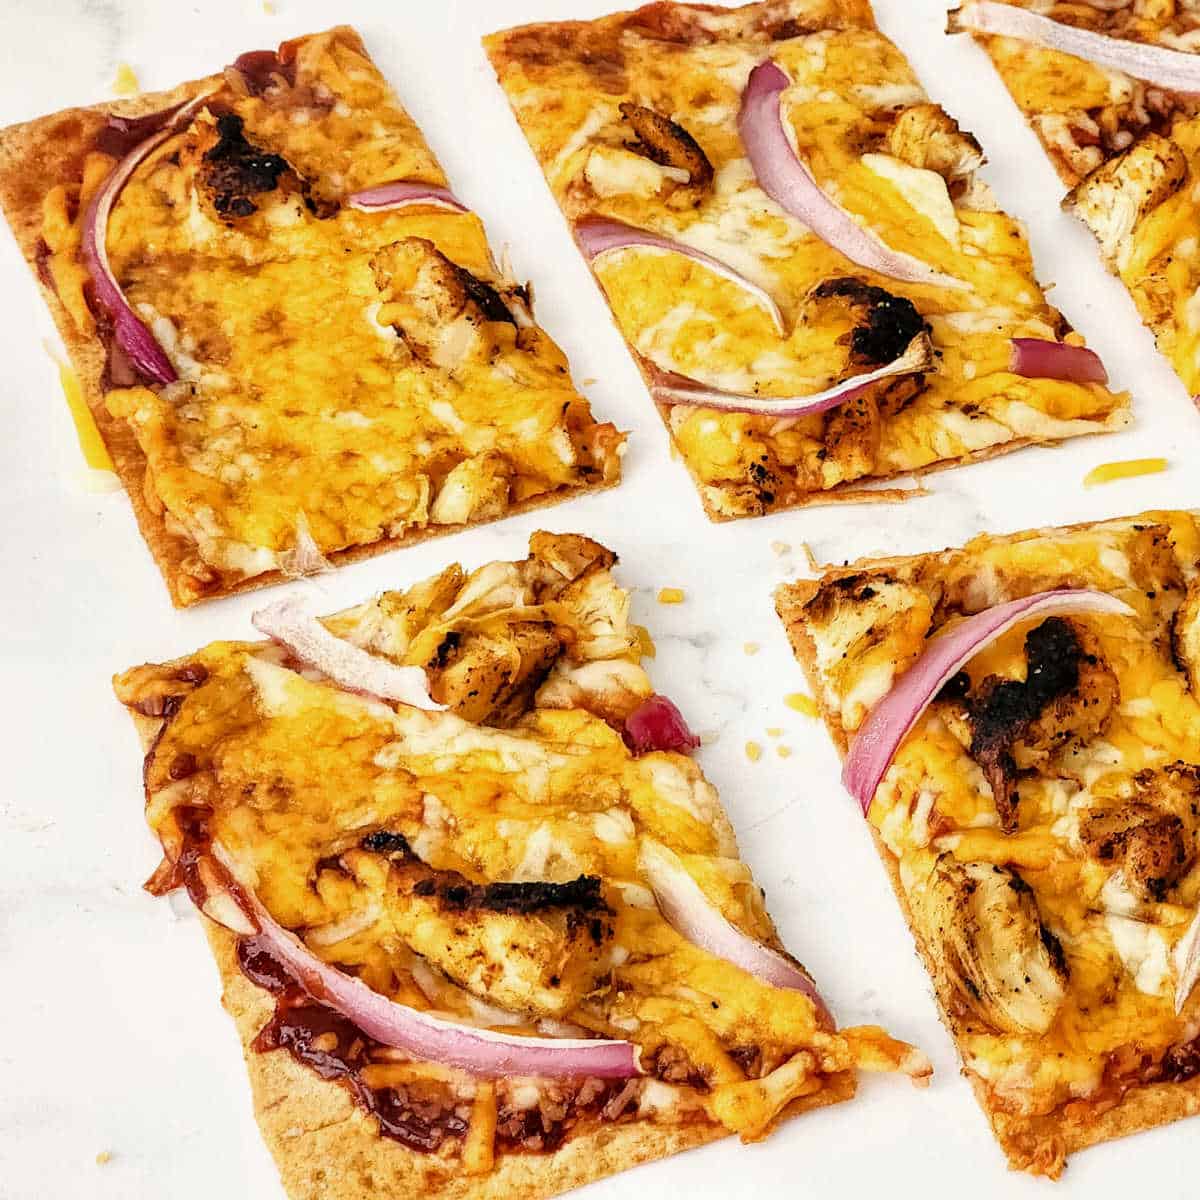 Baked chicken pizza with red onions cut in squares.